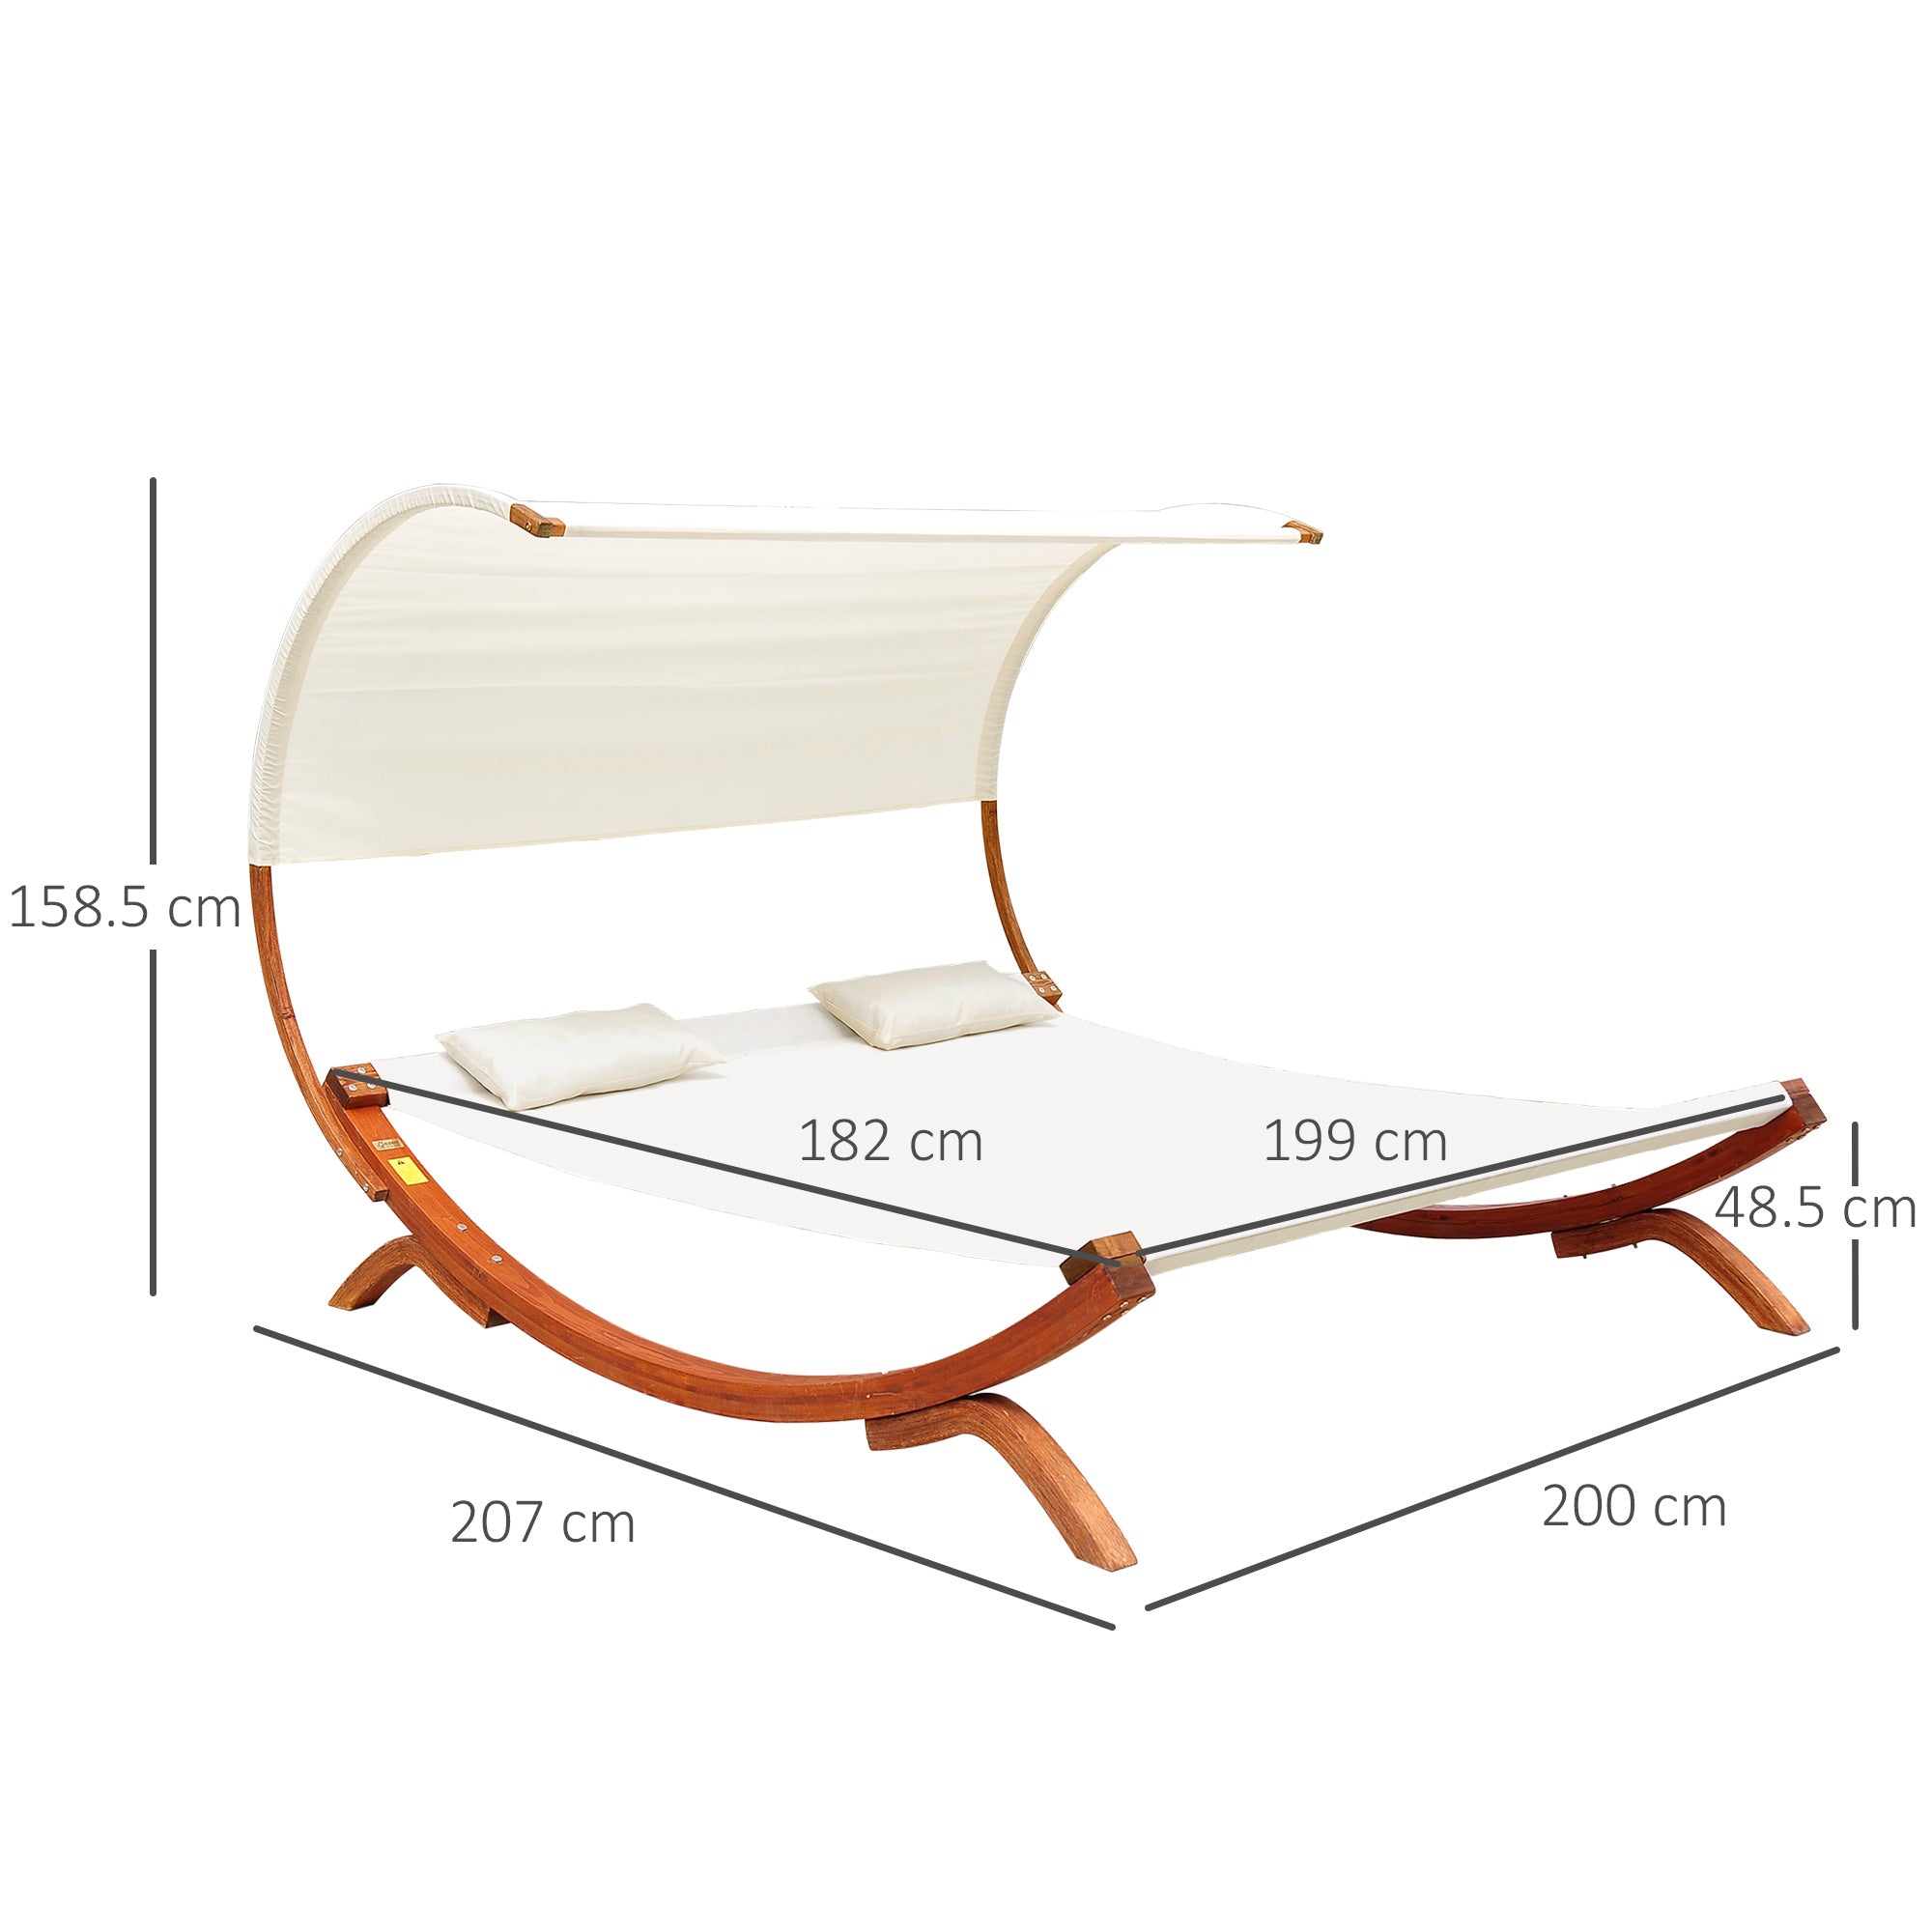 Hammock Chaise Day Bed with Canopy Wooden Double Sun Lounger - Cream-2